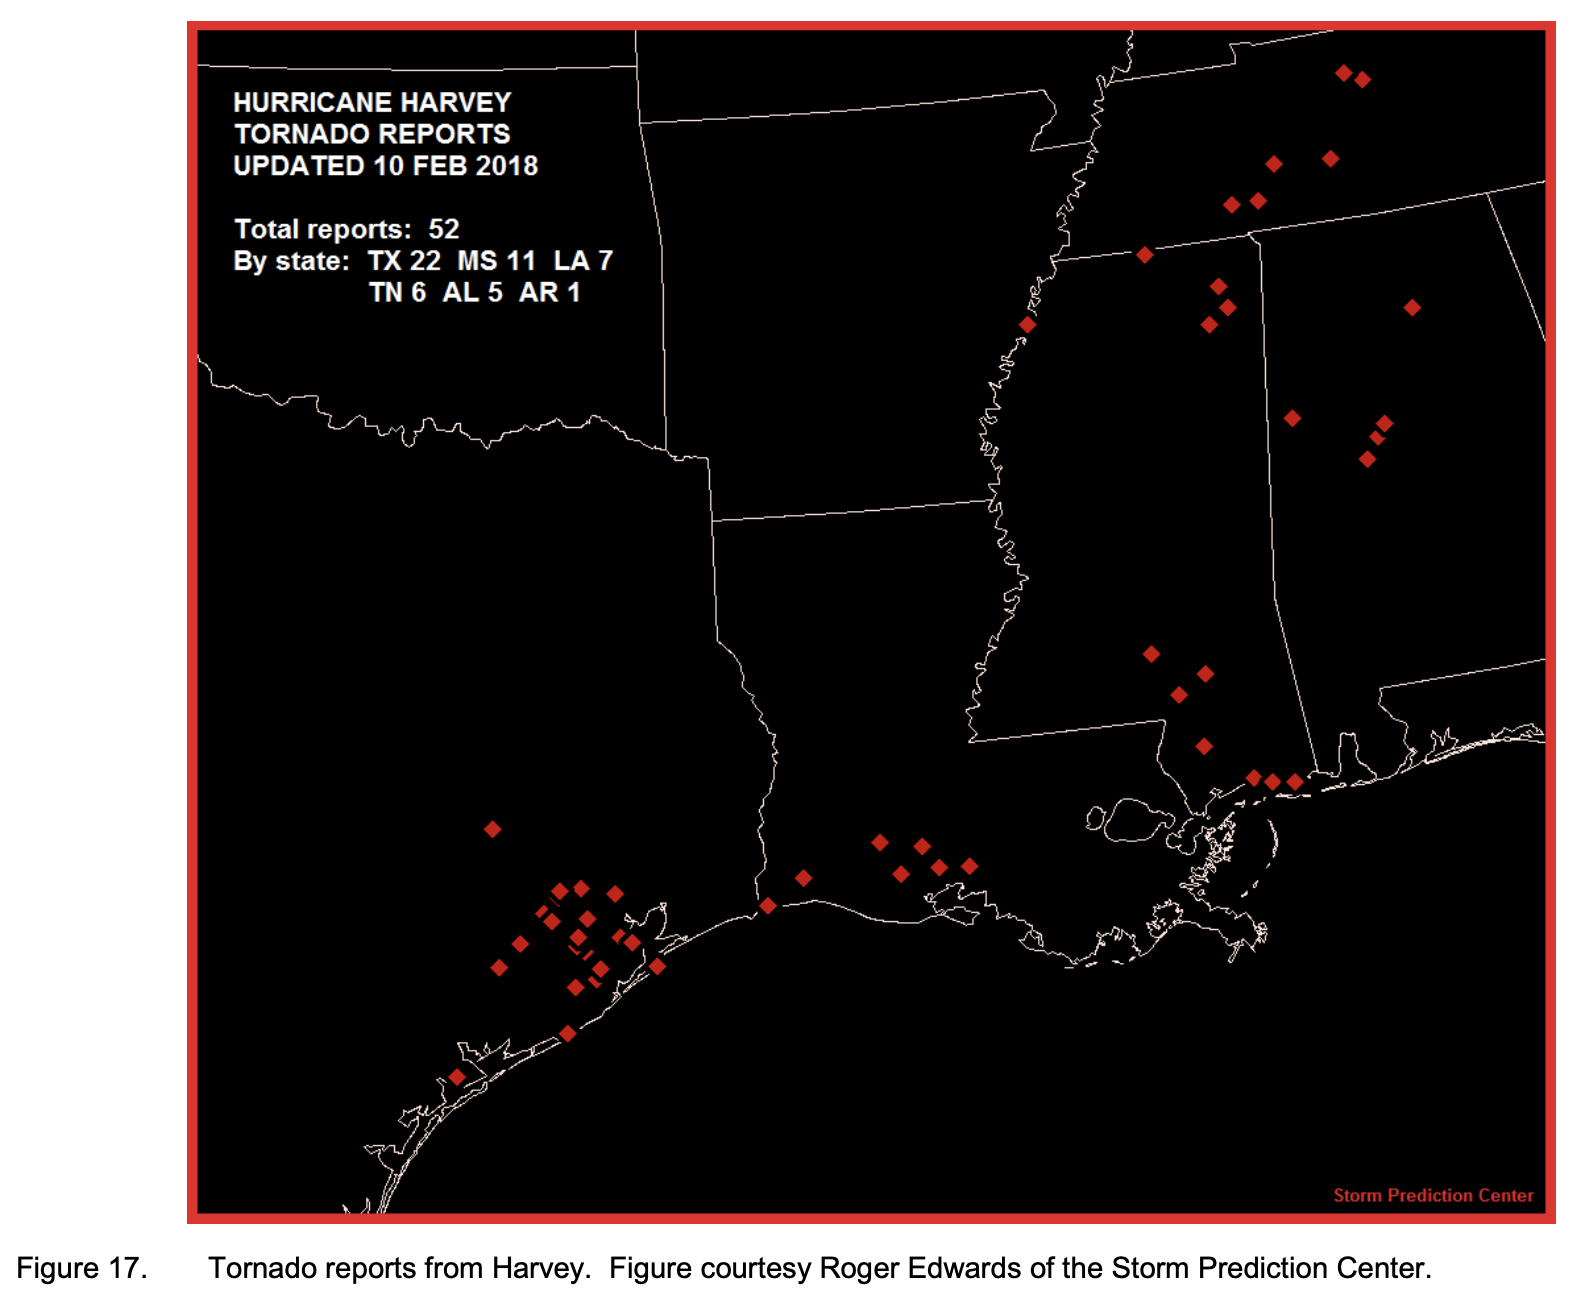 Location of Tornadoes reported in Hurricane Harvey